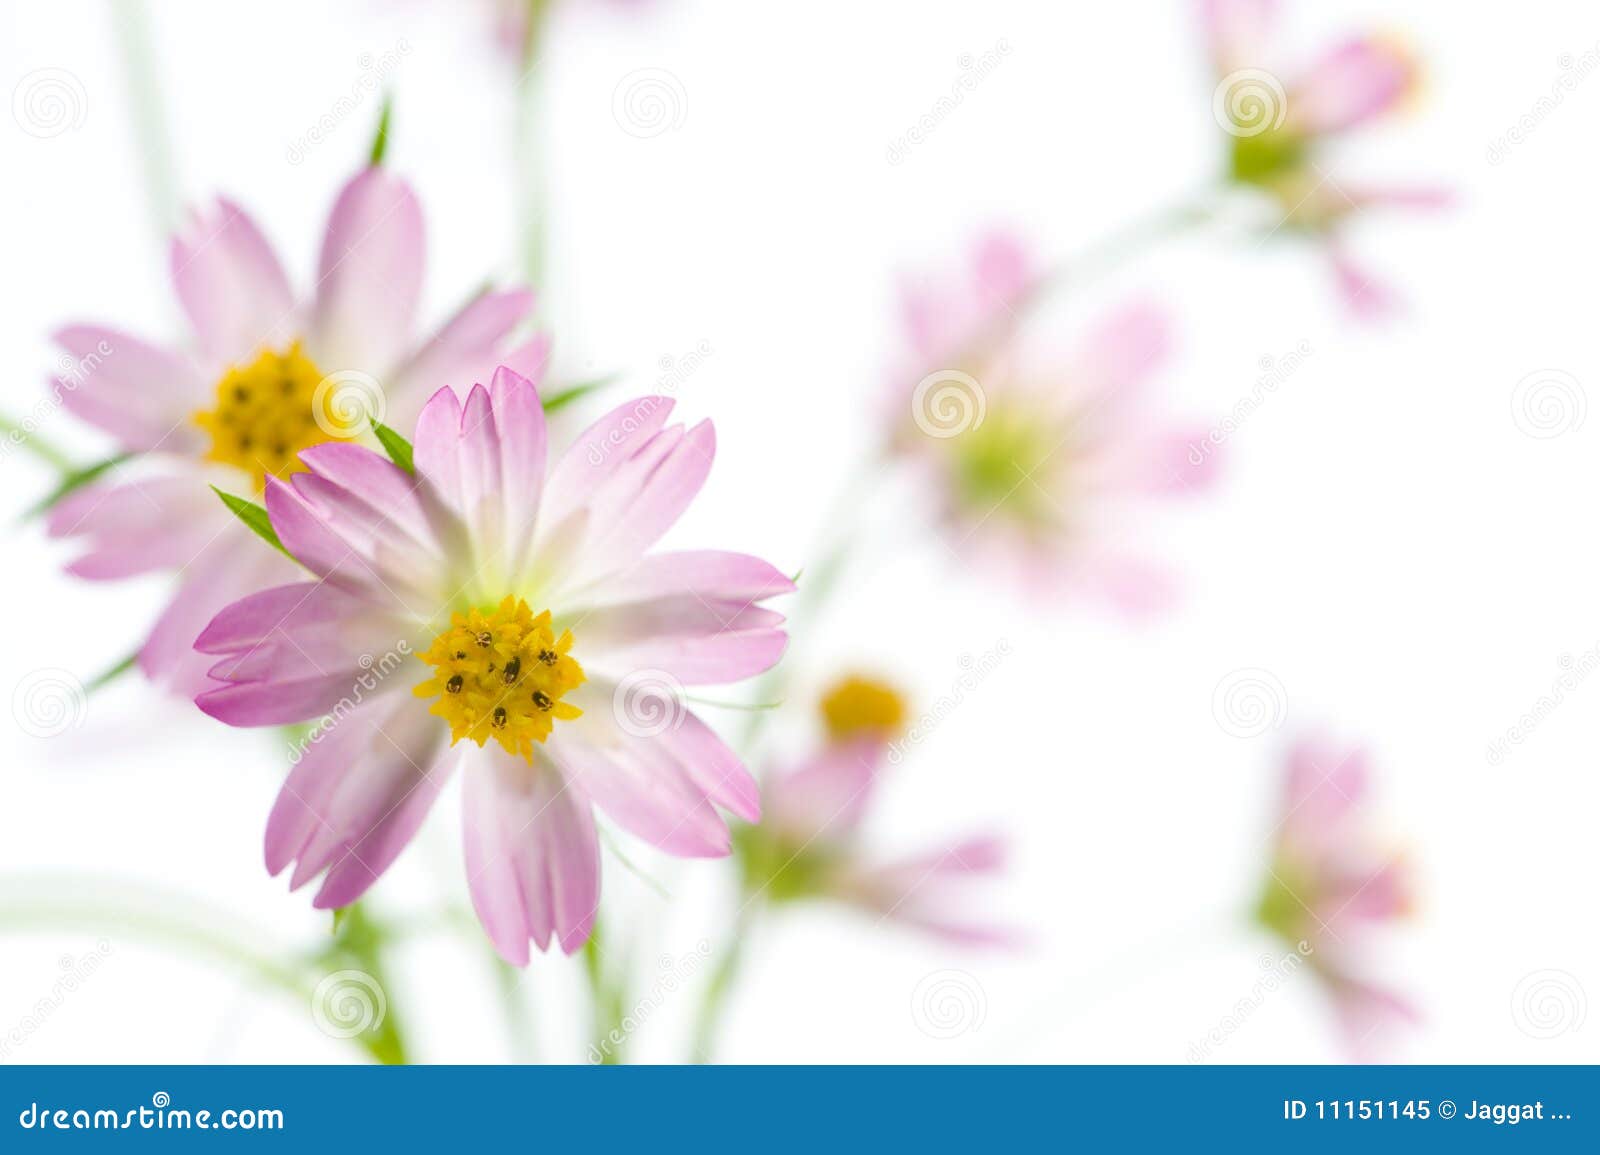 clipart of cosmos flower - photo #22